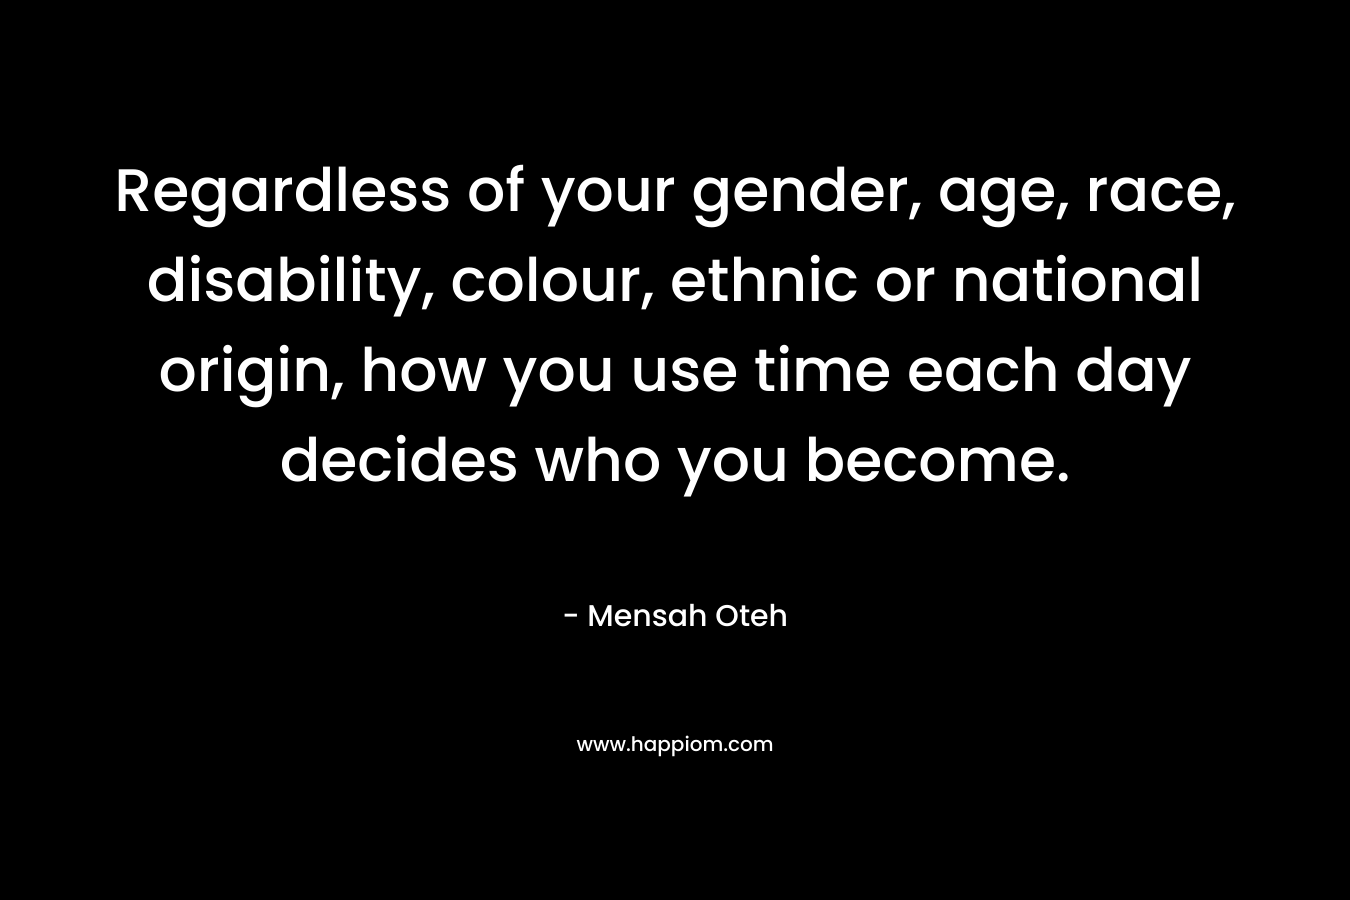 Regardless of your gender, age, race, disability, colour, ethnic or national origin, how you use time each day decides who you become.